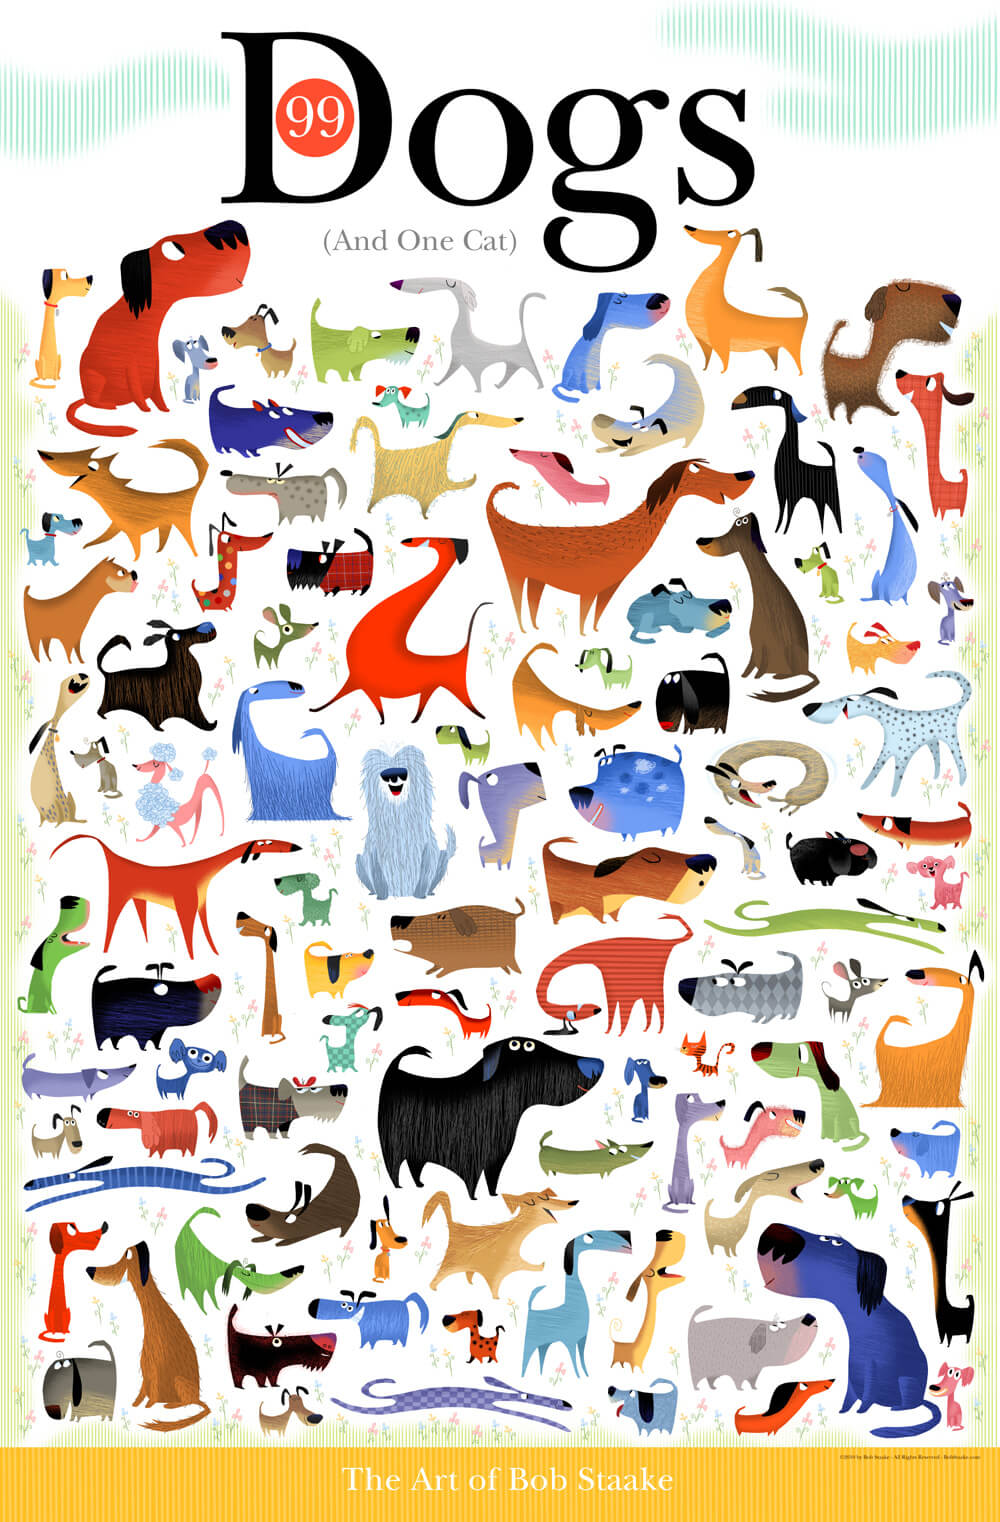 FIND A DOG BETWEEN 100 CATS